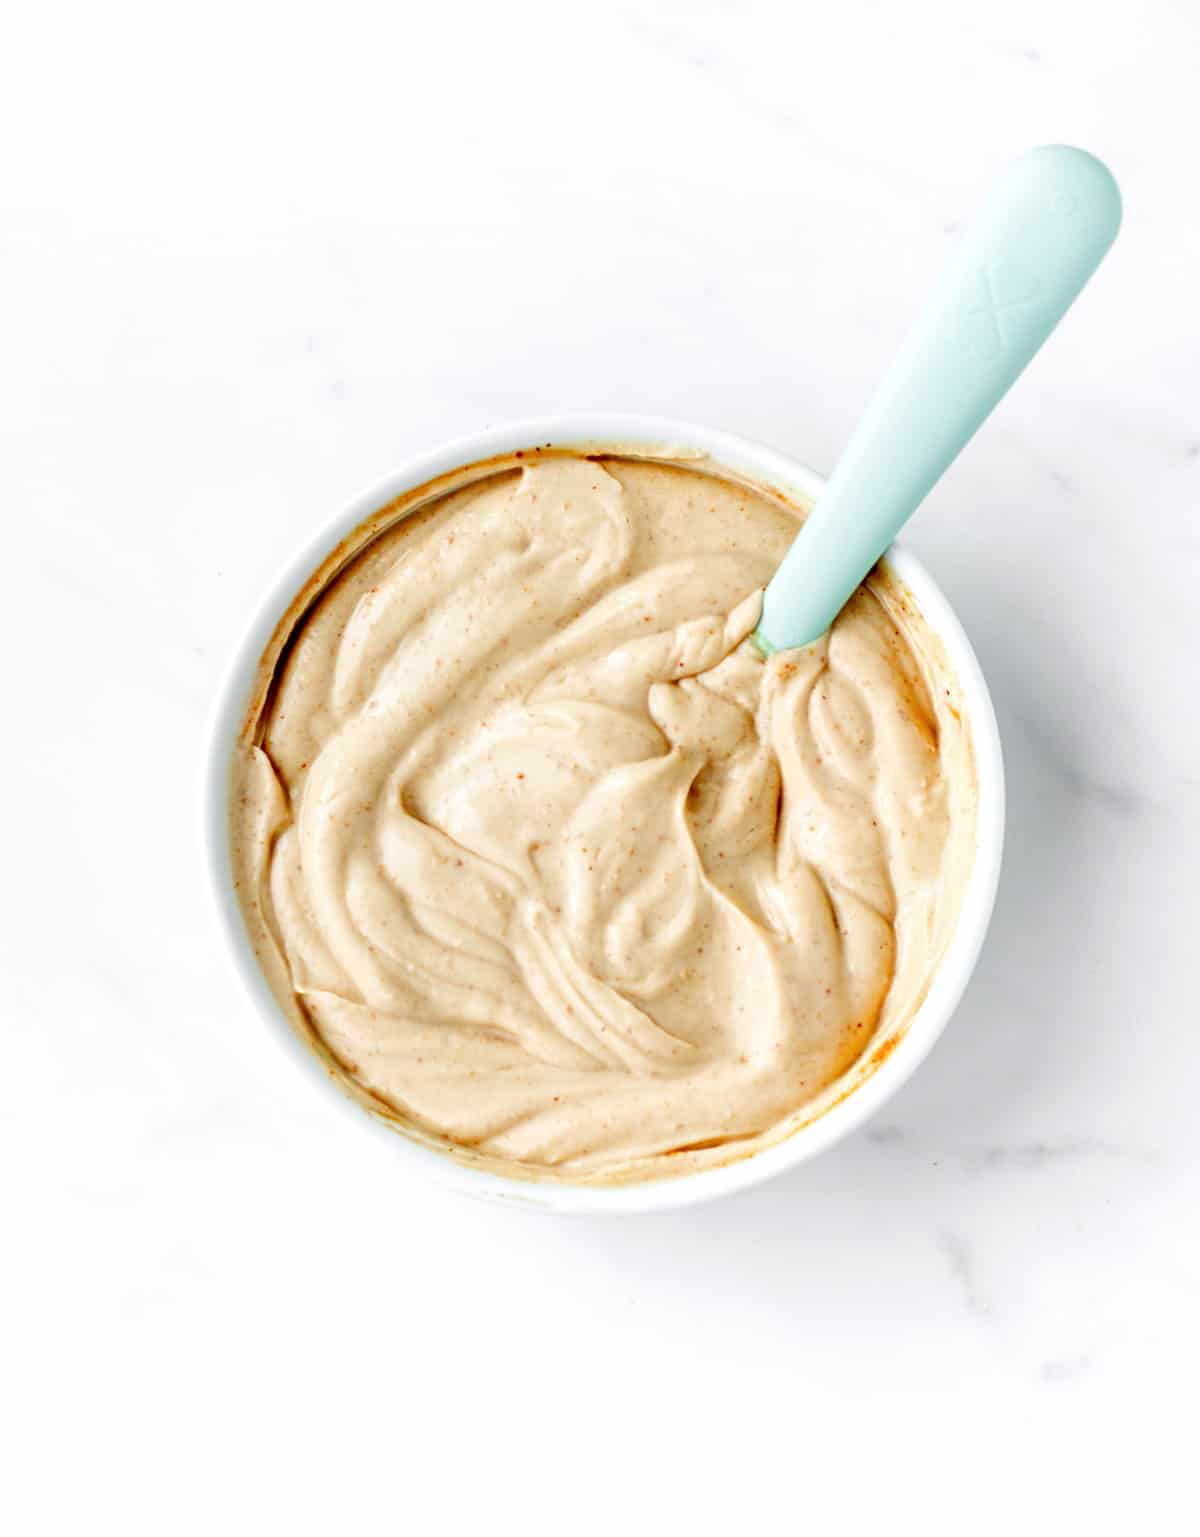 Peanut butter and yogurt dip being stirred together in a bowl.